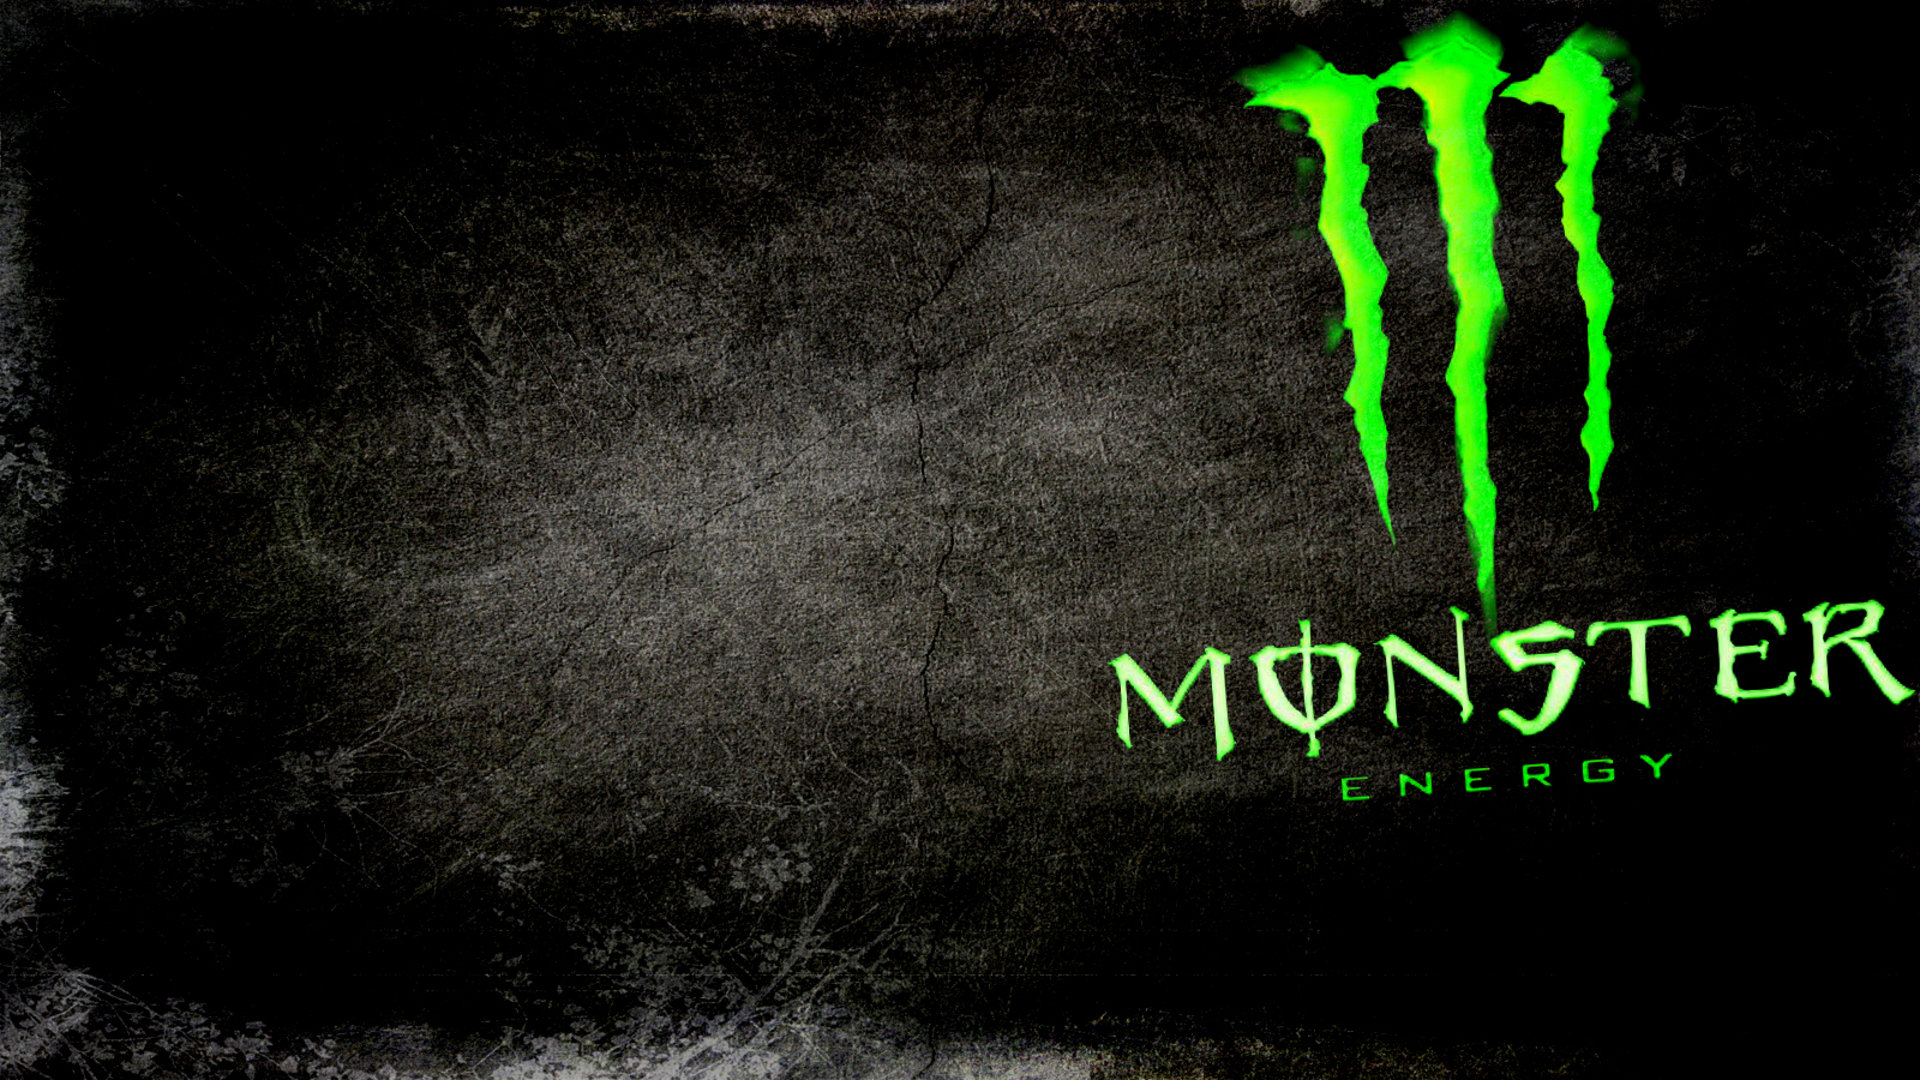 Download full hd 1920x1080 Monster Energy computer wallpaper ID:254297 for free